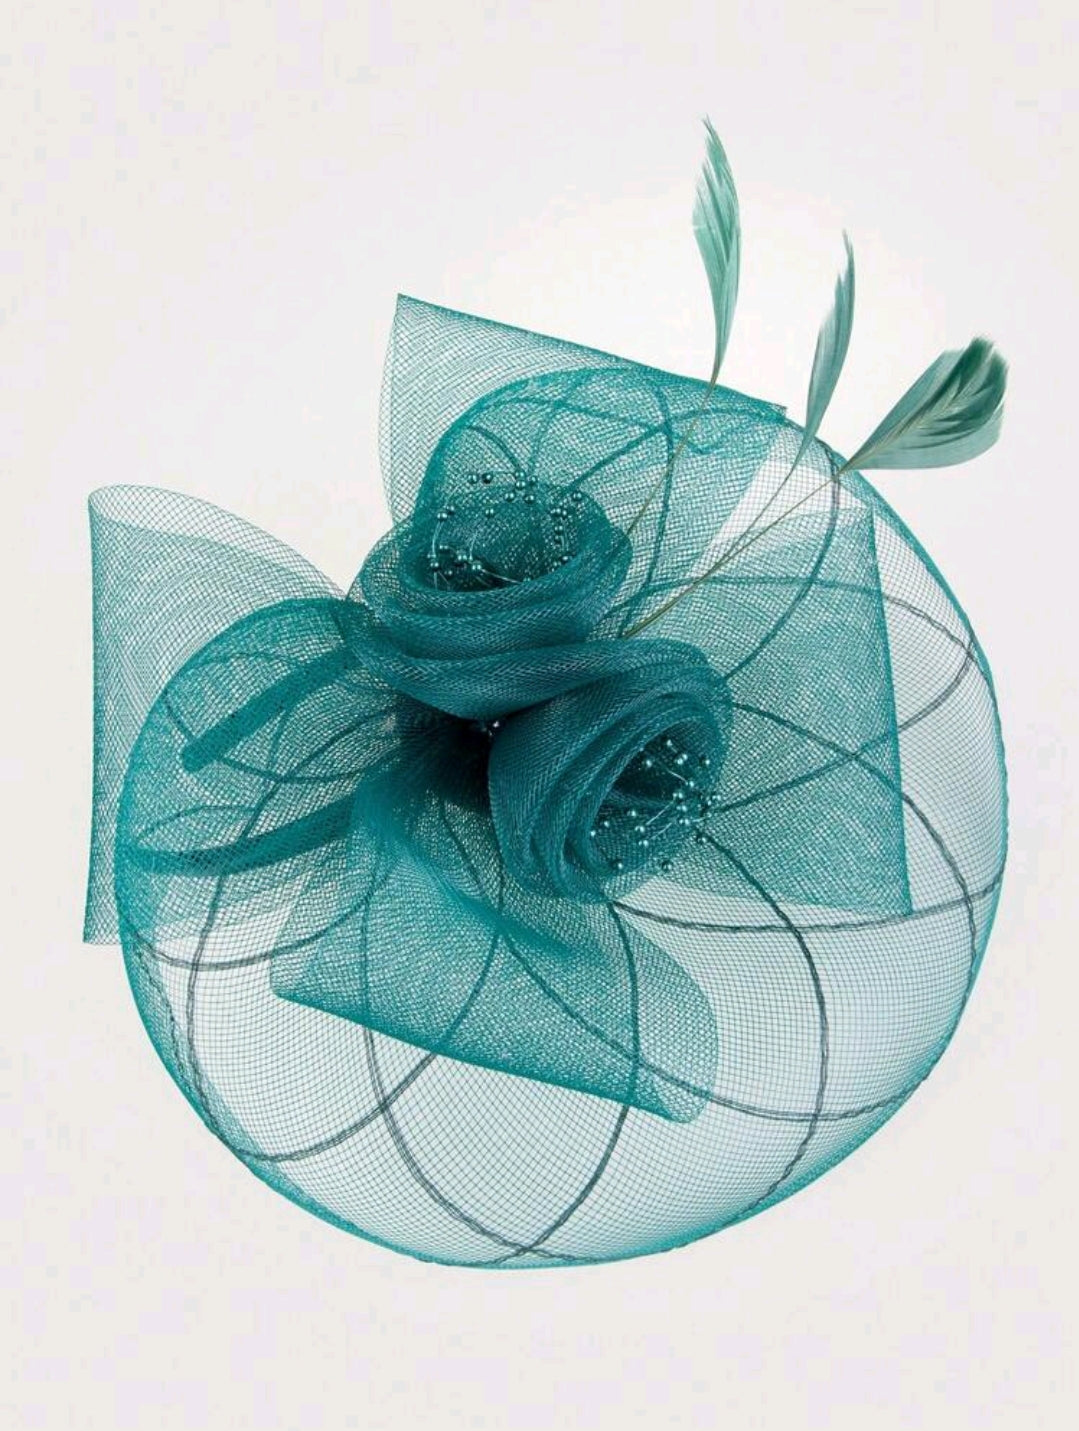 Feather Fascinator Teal